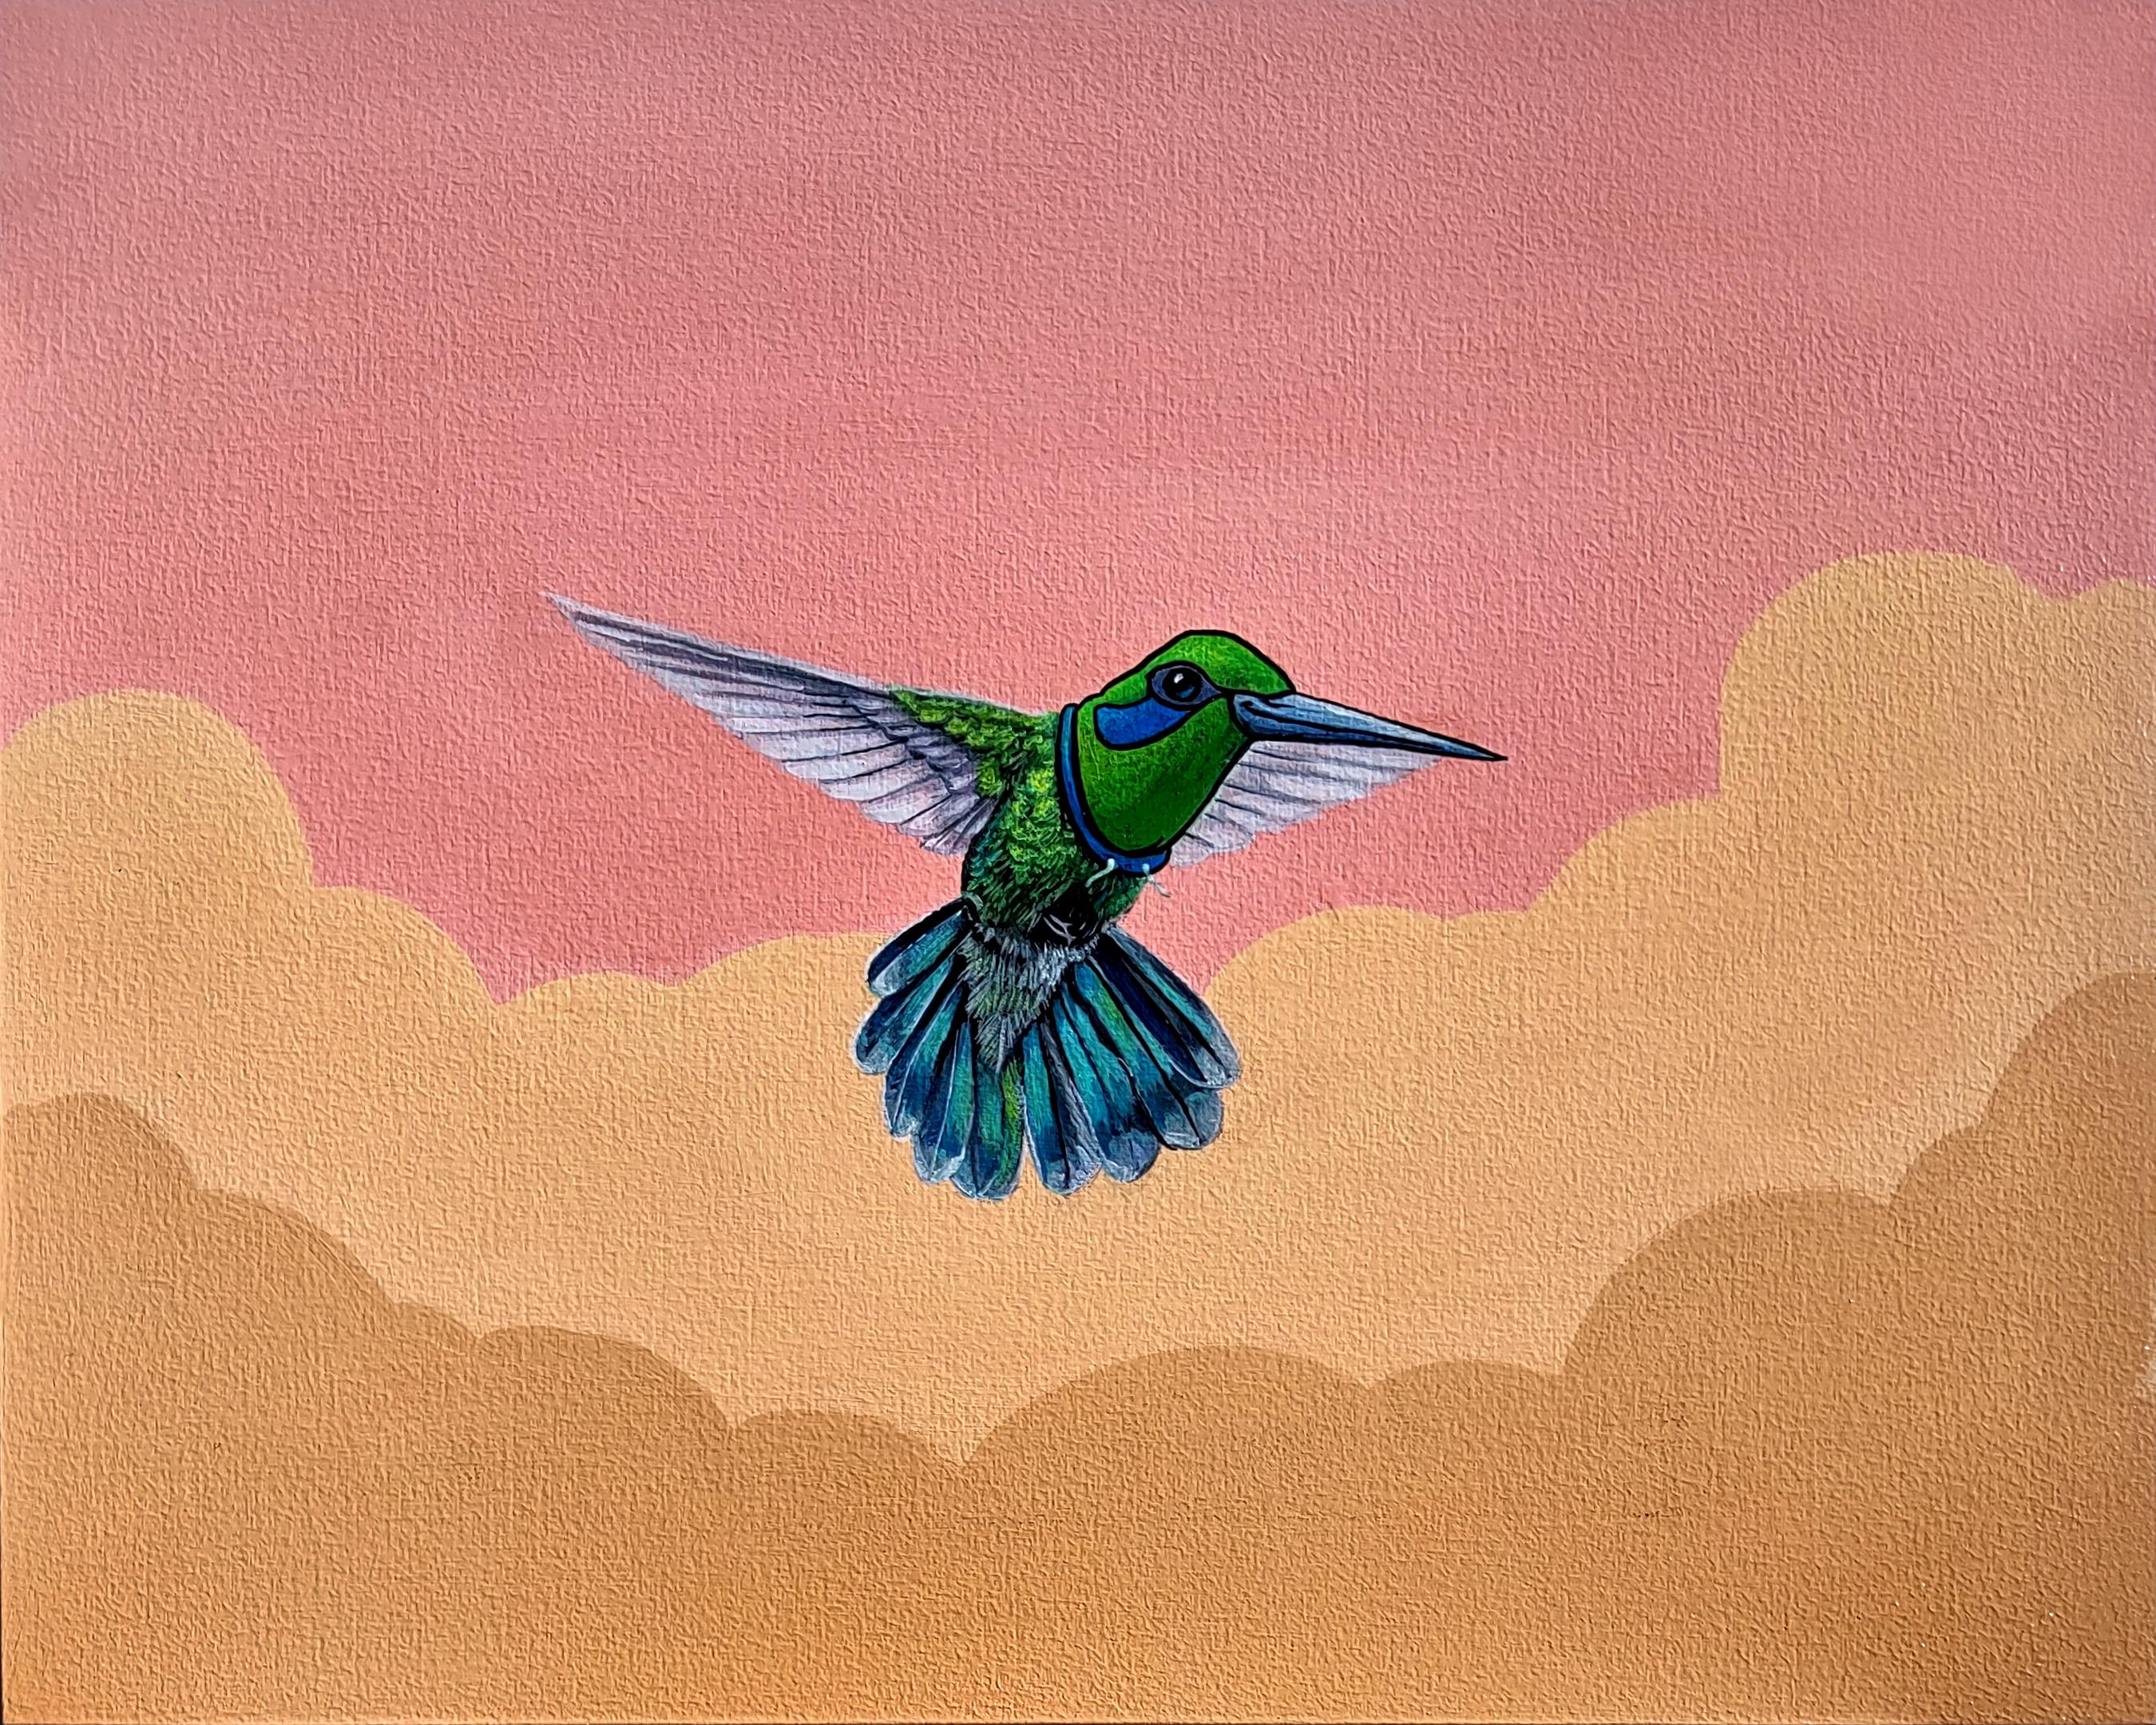 3rd Version (Ben Patterson) Animal Painting - "Reaching New Heights", Hummingbird in Flight Oil Painting